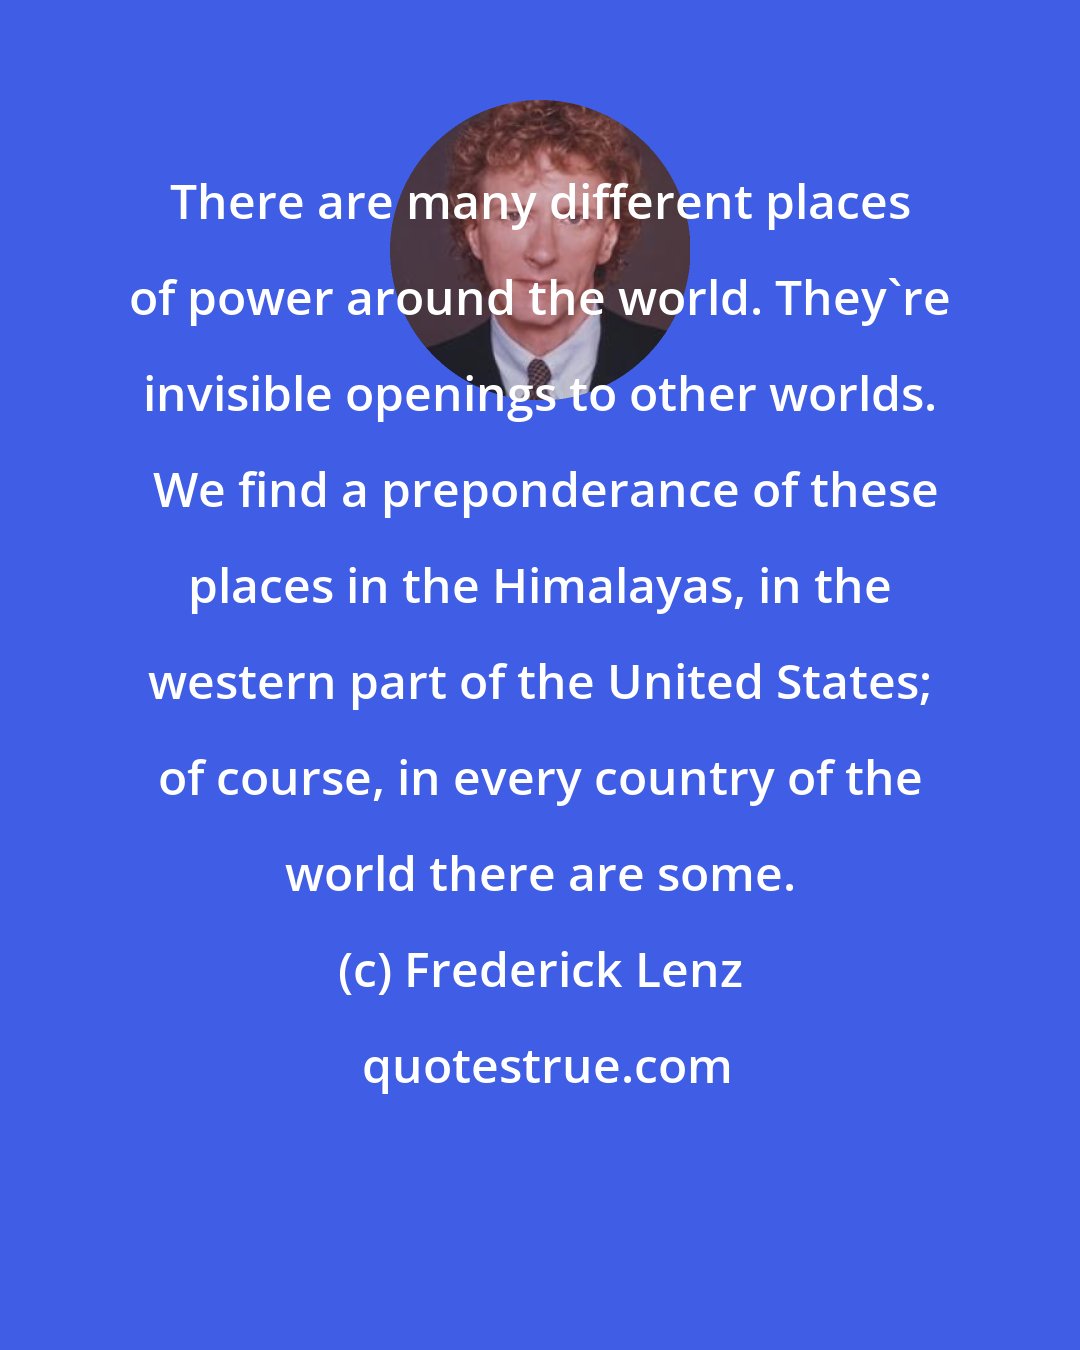 Frederick Lenz: There are many different places of power around the world. They're invisible openings to other worlds.  We find a preponderance of these places in the Himalayas, in the western part of the United States; of course, in every country of the world there are some.